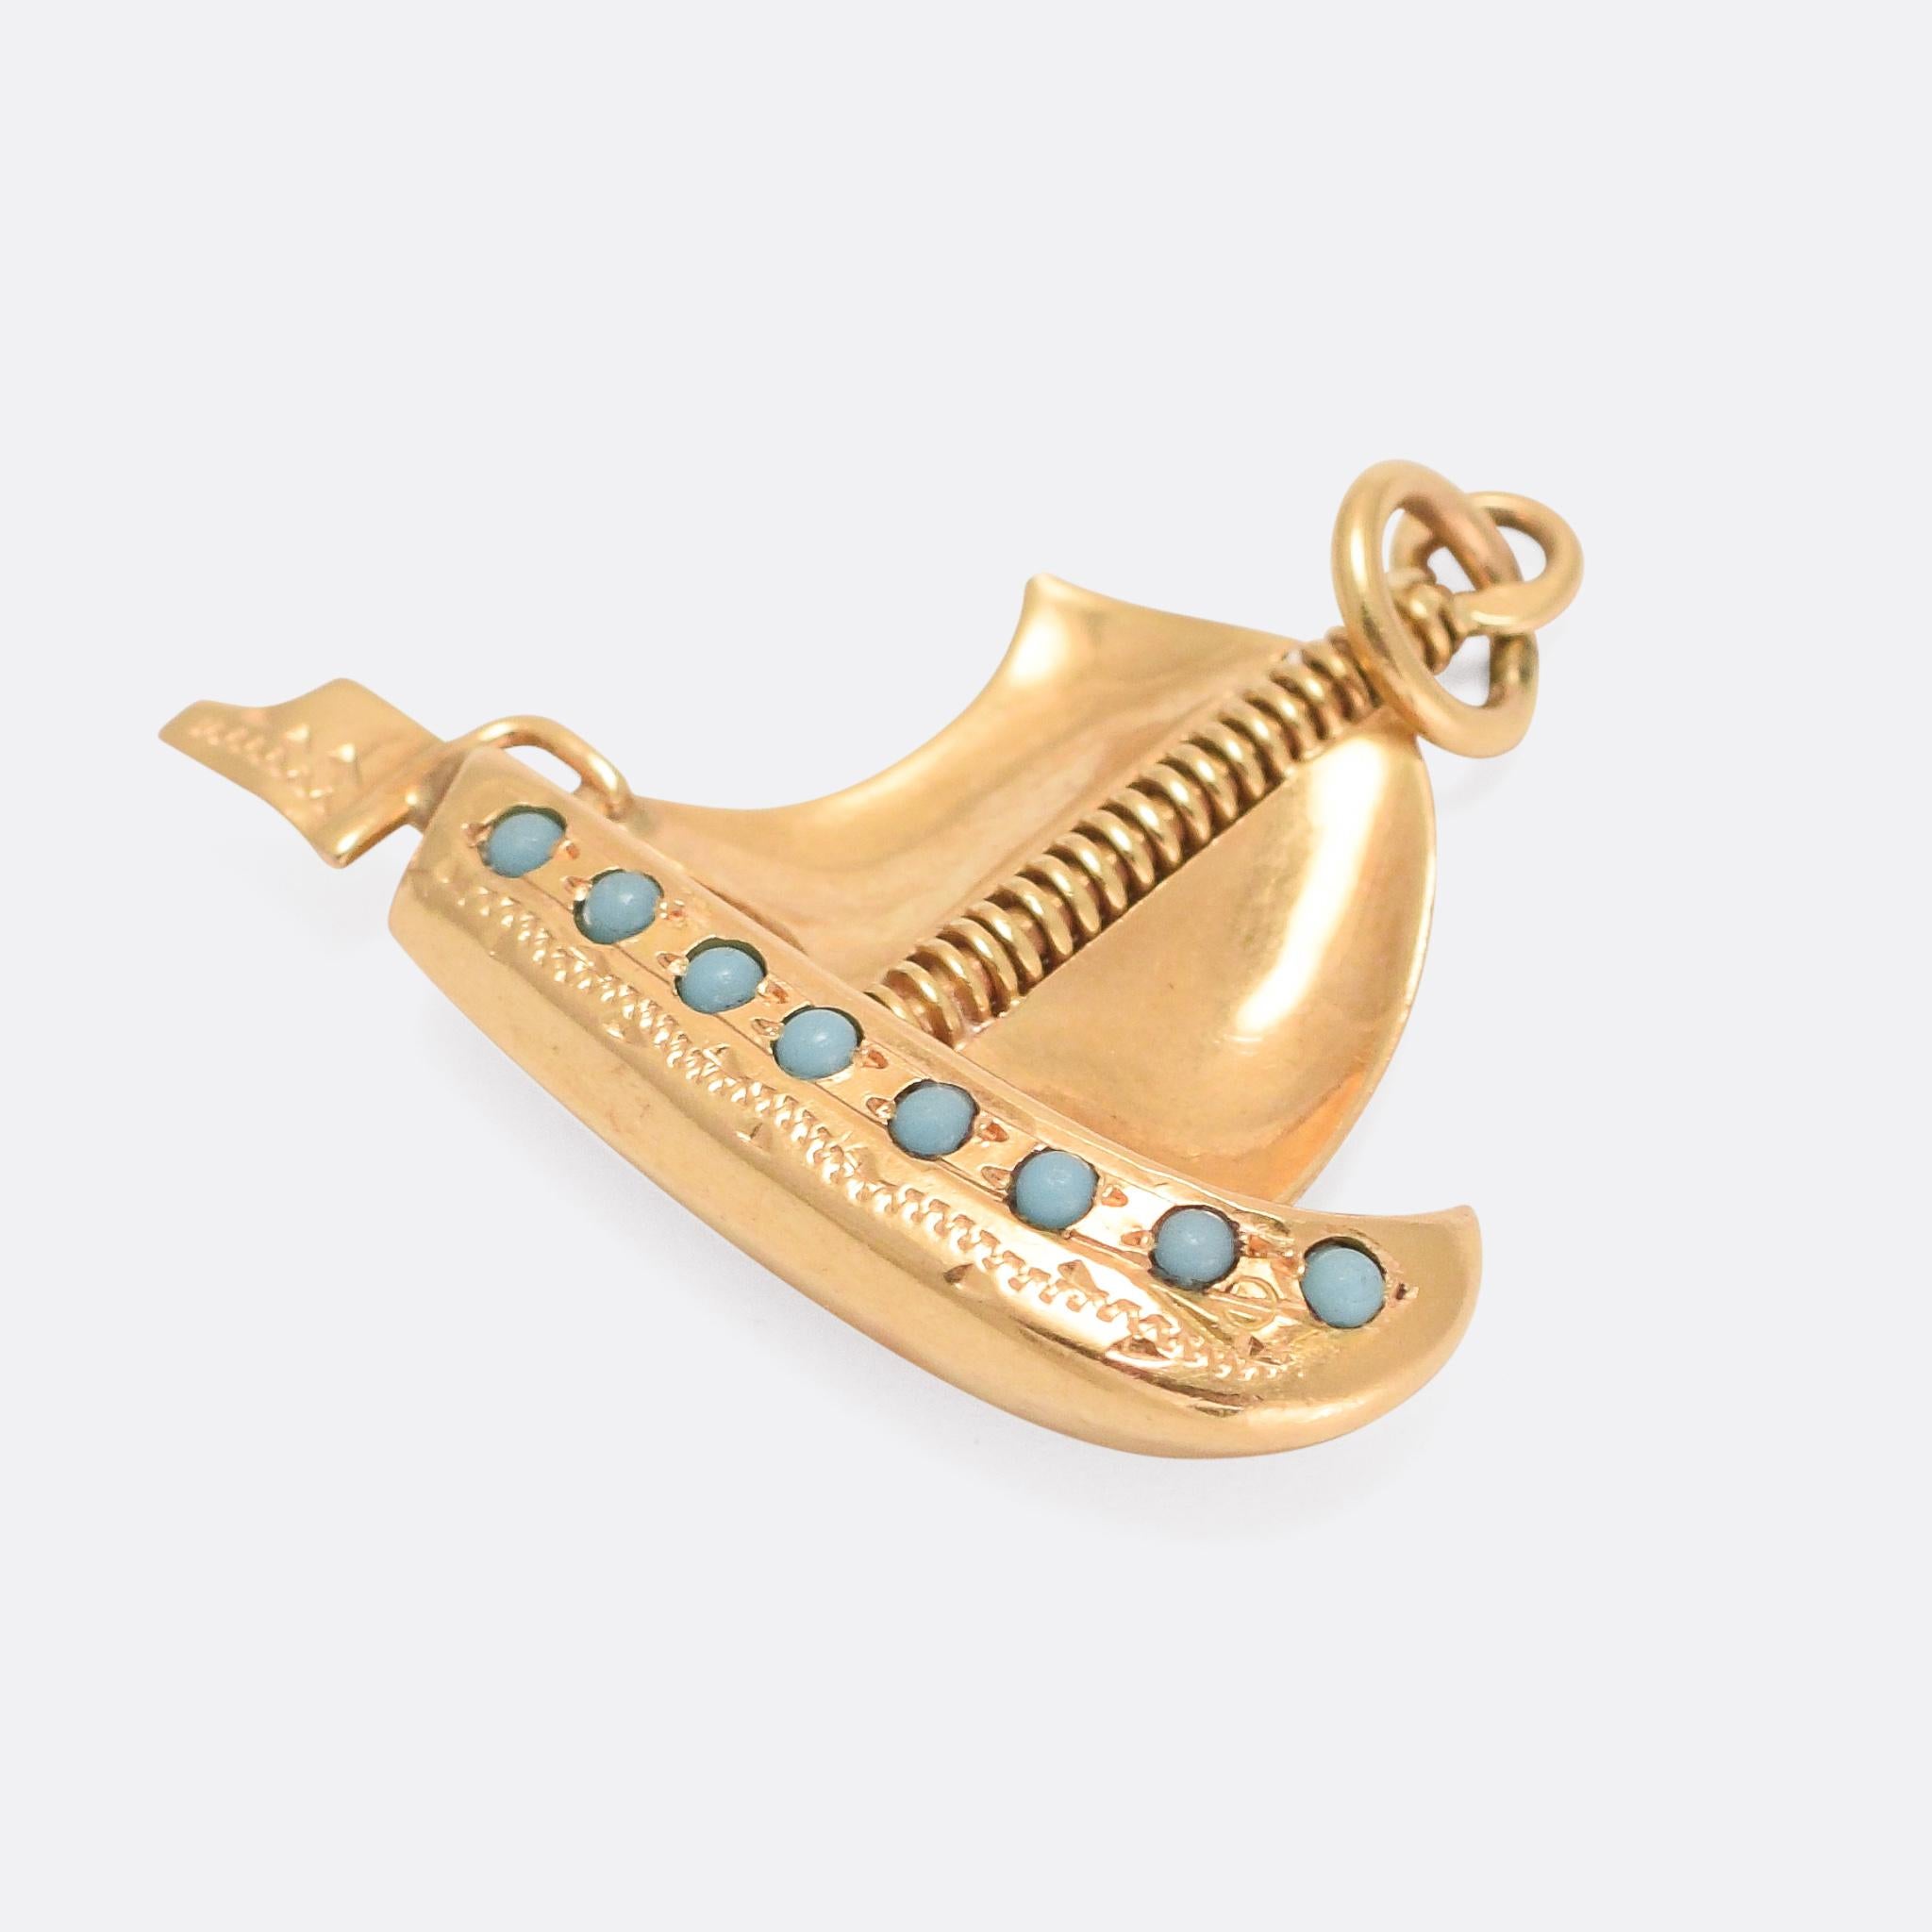 A fine antique boat pendant modelled in high carat and set with turquoise cabochons to the front and back. It's expertly hand crafted, with excellent detailing and textures. With Portuguese hallmarks for 800 grade gold (approx. 19.2 karats)

STONES